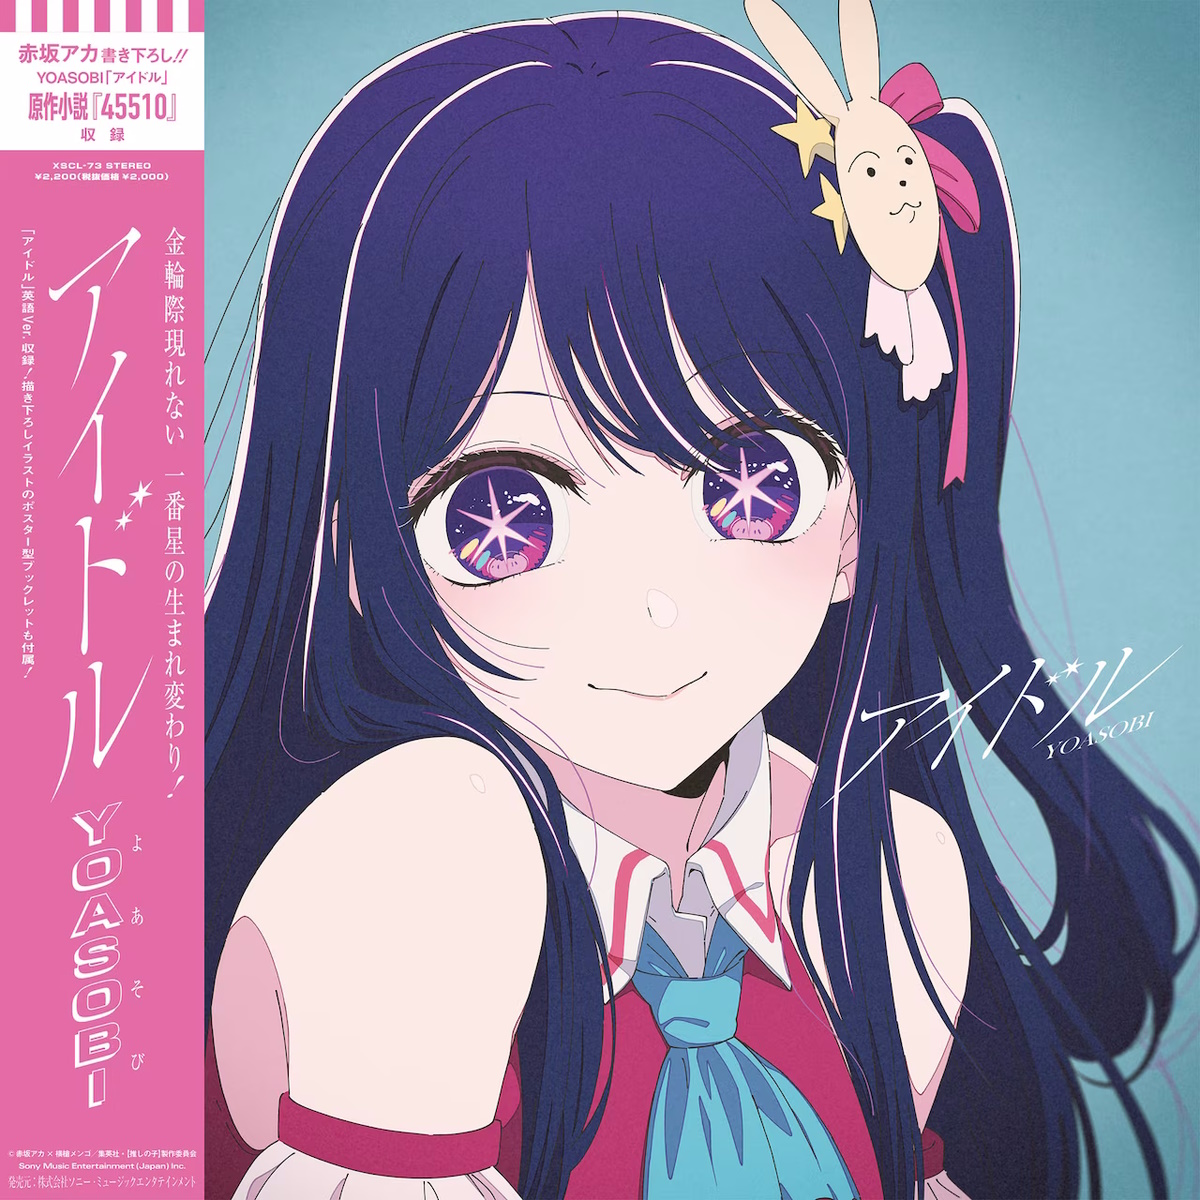 Cover art for『YOASOBI - Idol (English Ver.)』from the release『Idol』